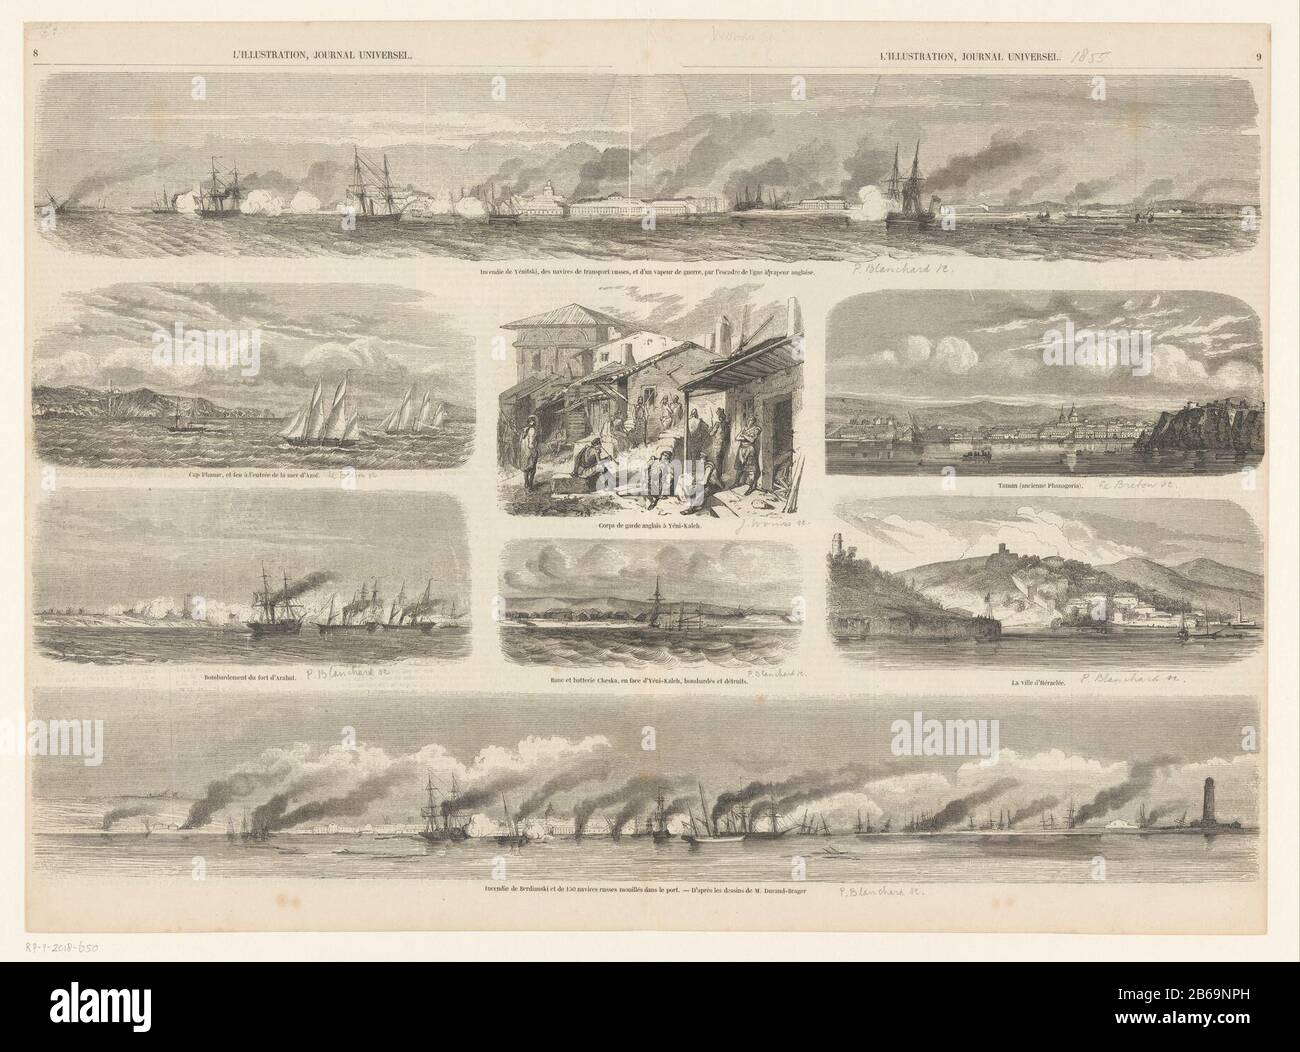 Double page with eight scenes from the Crimean War, 1855. Mostly zeeslagen. Manufacturer : printmaker Jules Worm print Author: P. Blanchard print Author: Le Breton Post production: France Date: 1855 Physical features: wood engra material: paper Technique: wood engra dimensions: sheet: h 364 mm × W 495 mmToelichtingIllustratie taken from L'Illustration, Journal Universel of July 7, 1855 . Subject: battle (+ naval force) Crimean War When: 1855 - 1855 Stock Photo